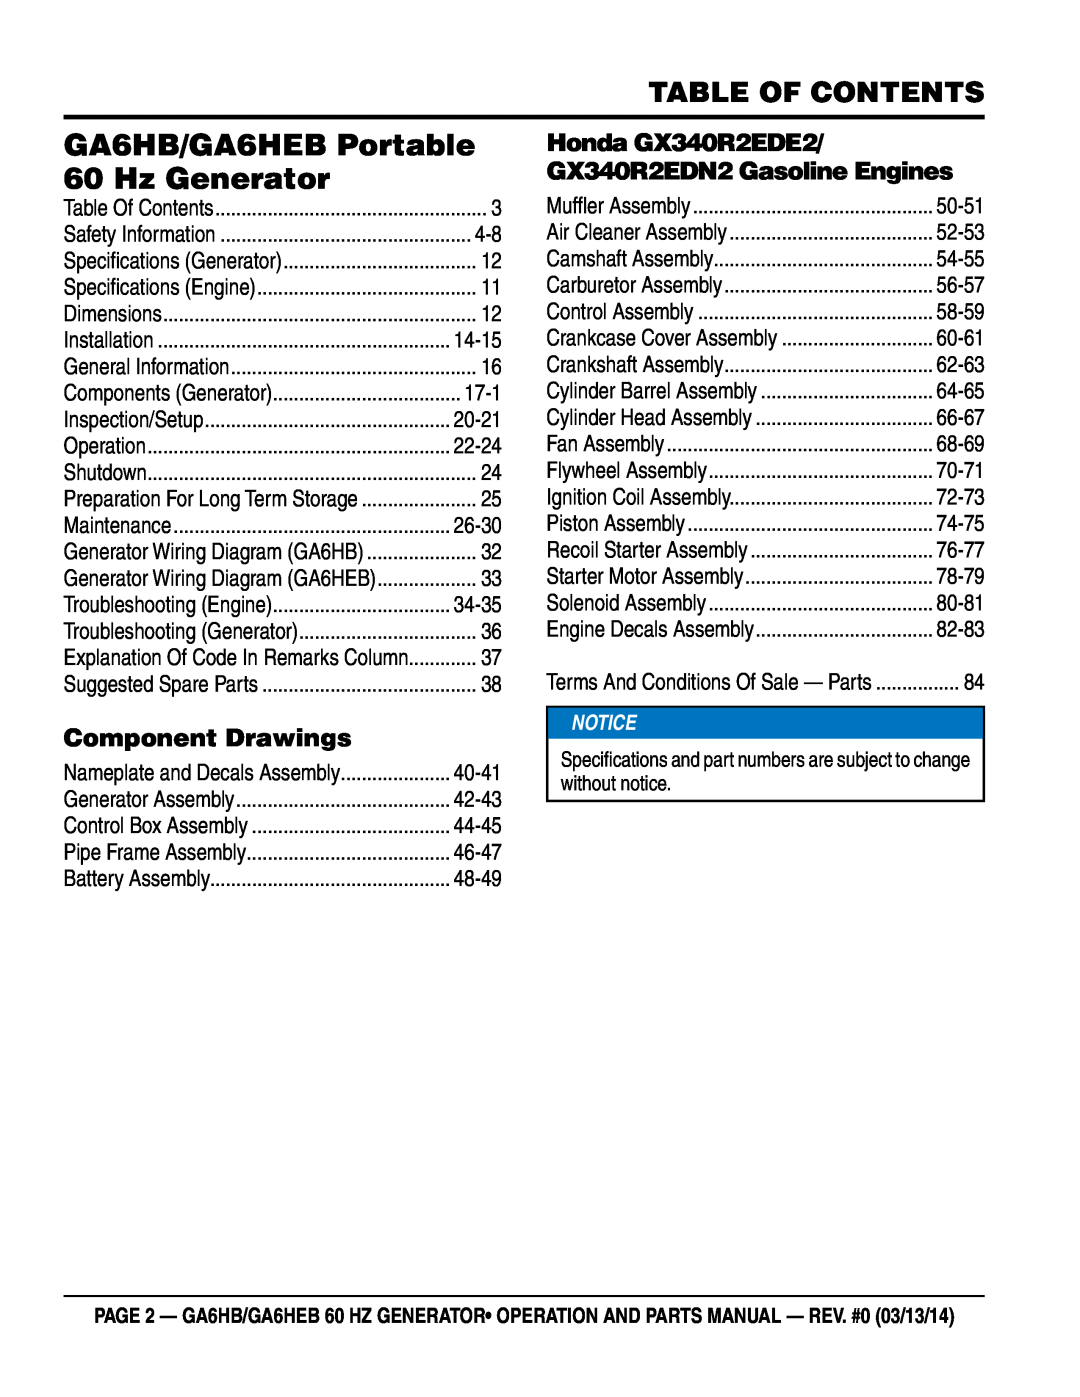 Multiquip ga6HEB, ga6HB manual Table of Contents, Component Drawings, Honda GX340R2EDE2/ GX340R2EDN2 Gasoline Engines, 17-1 